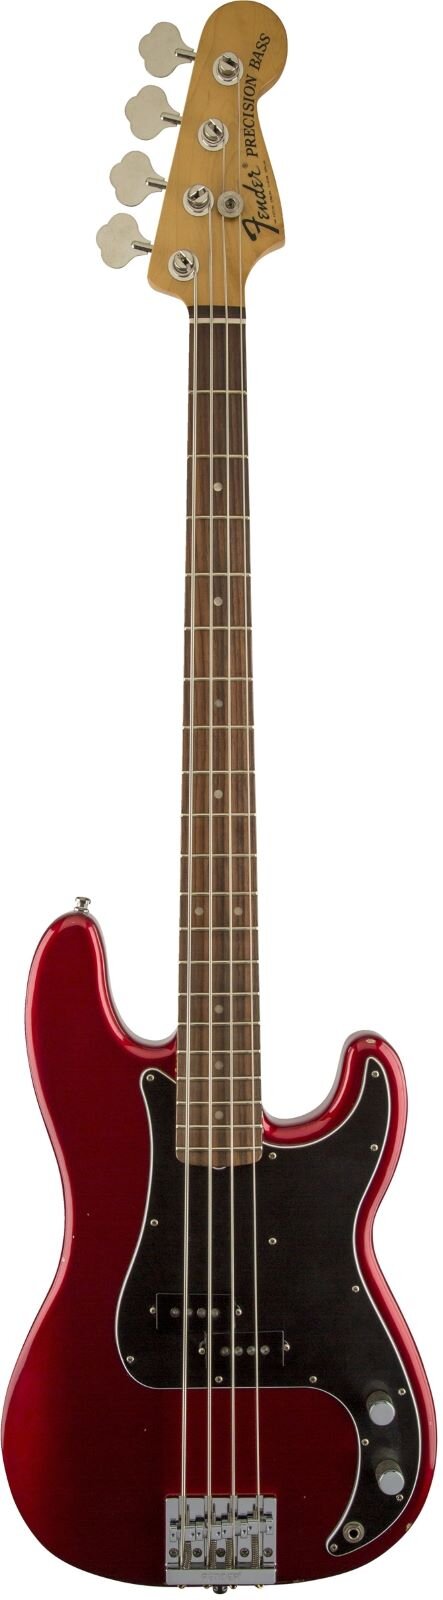 Fender Nate Mendel P Bass Rosewood Fingerboard Candy Apple Red : photo 1